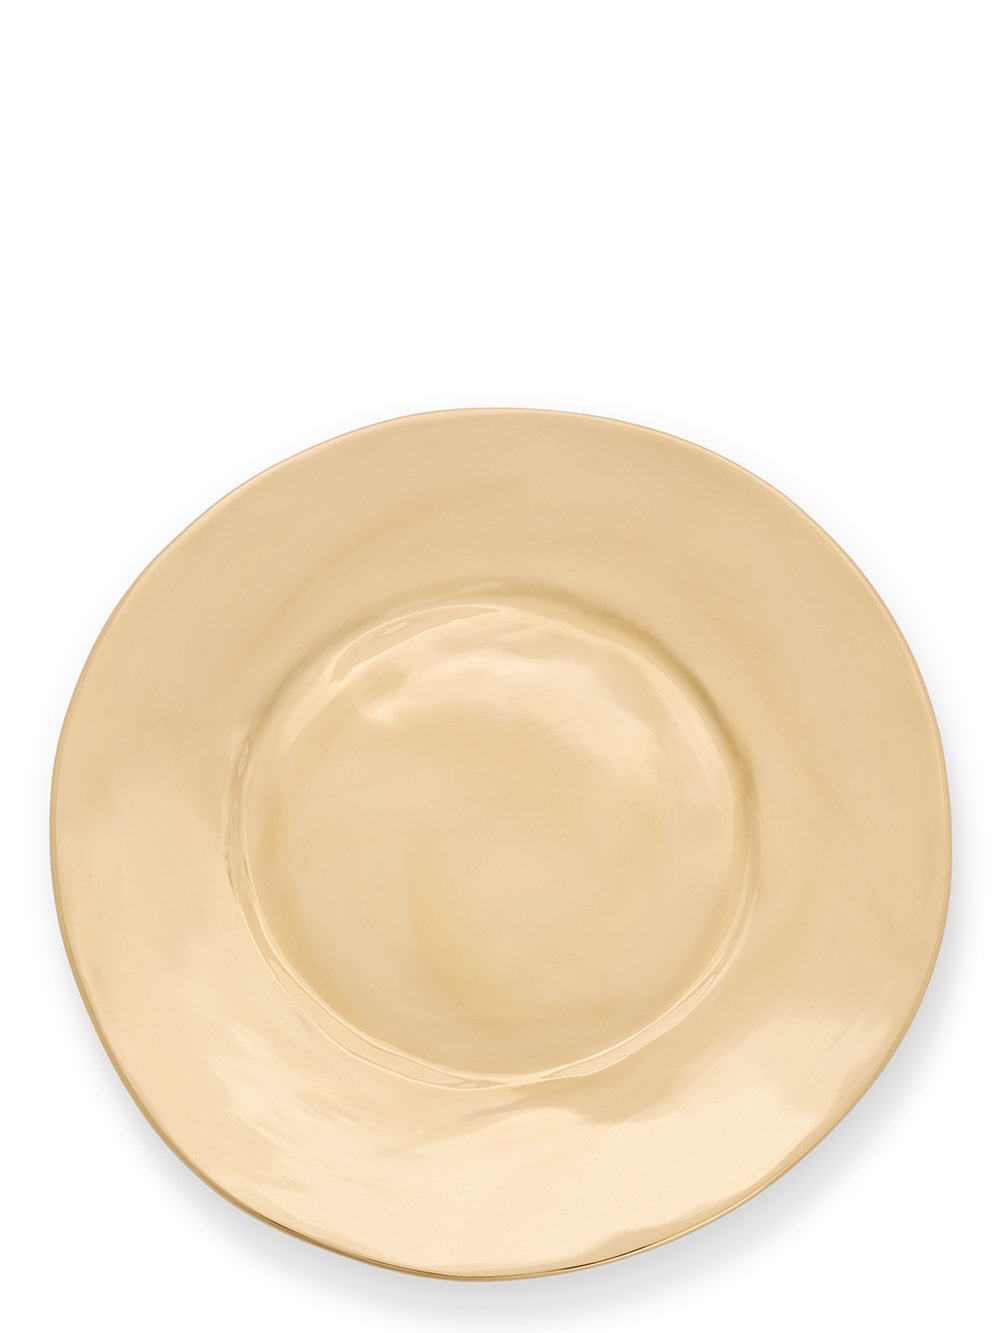 RICK OWENS LARGE PLATE IN GOLD TONE BRONZE.